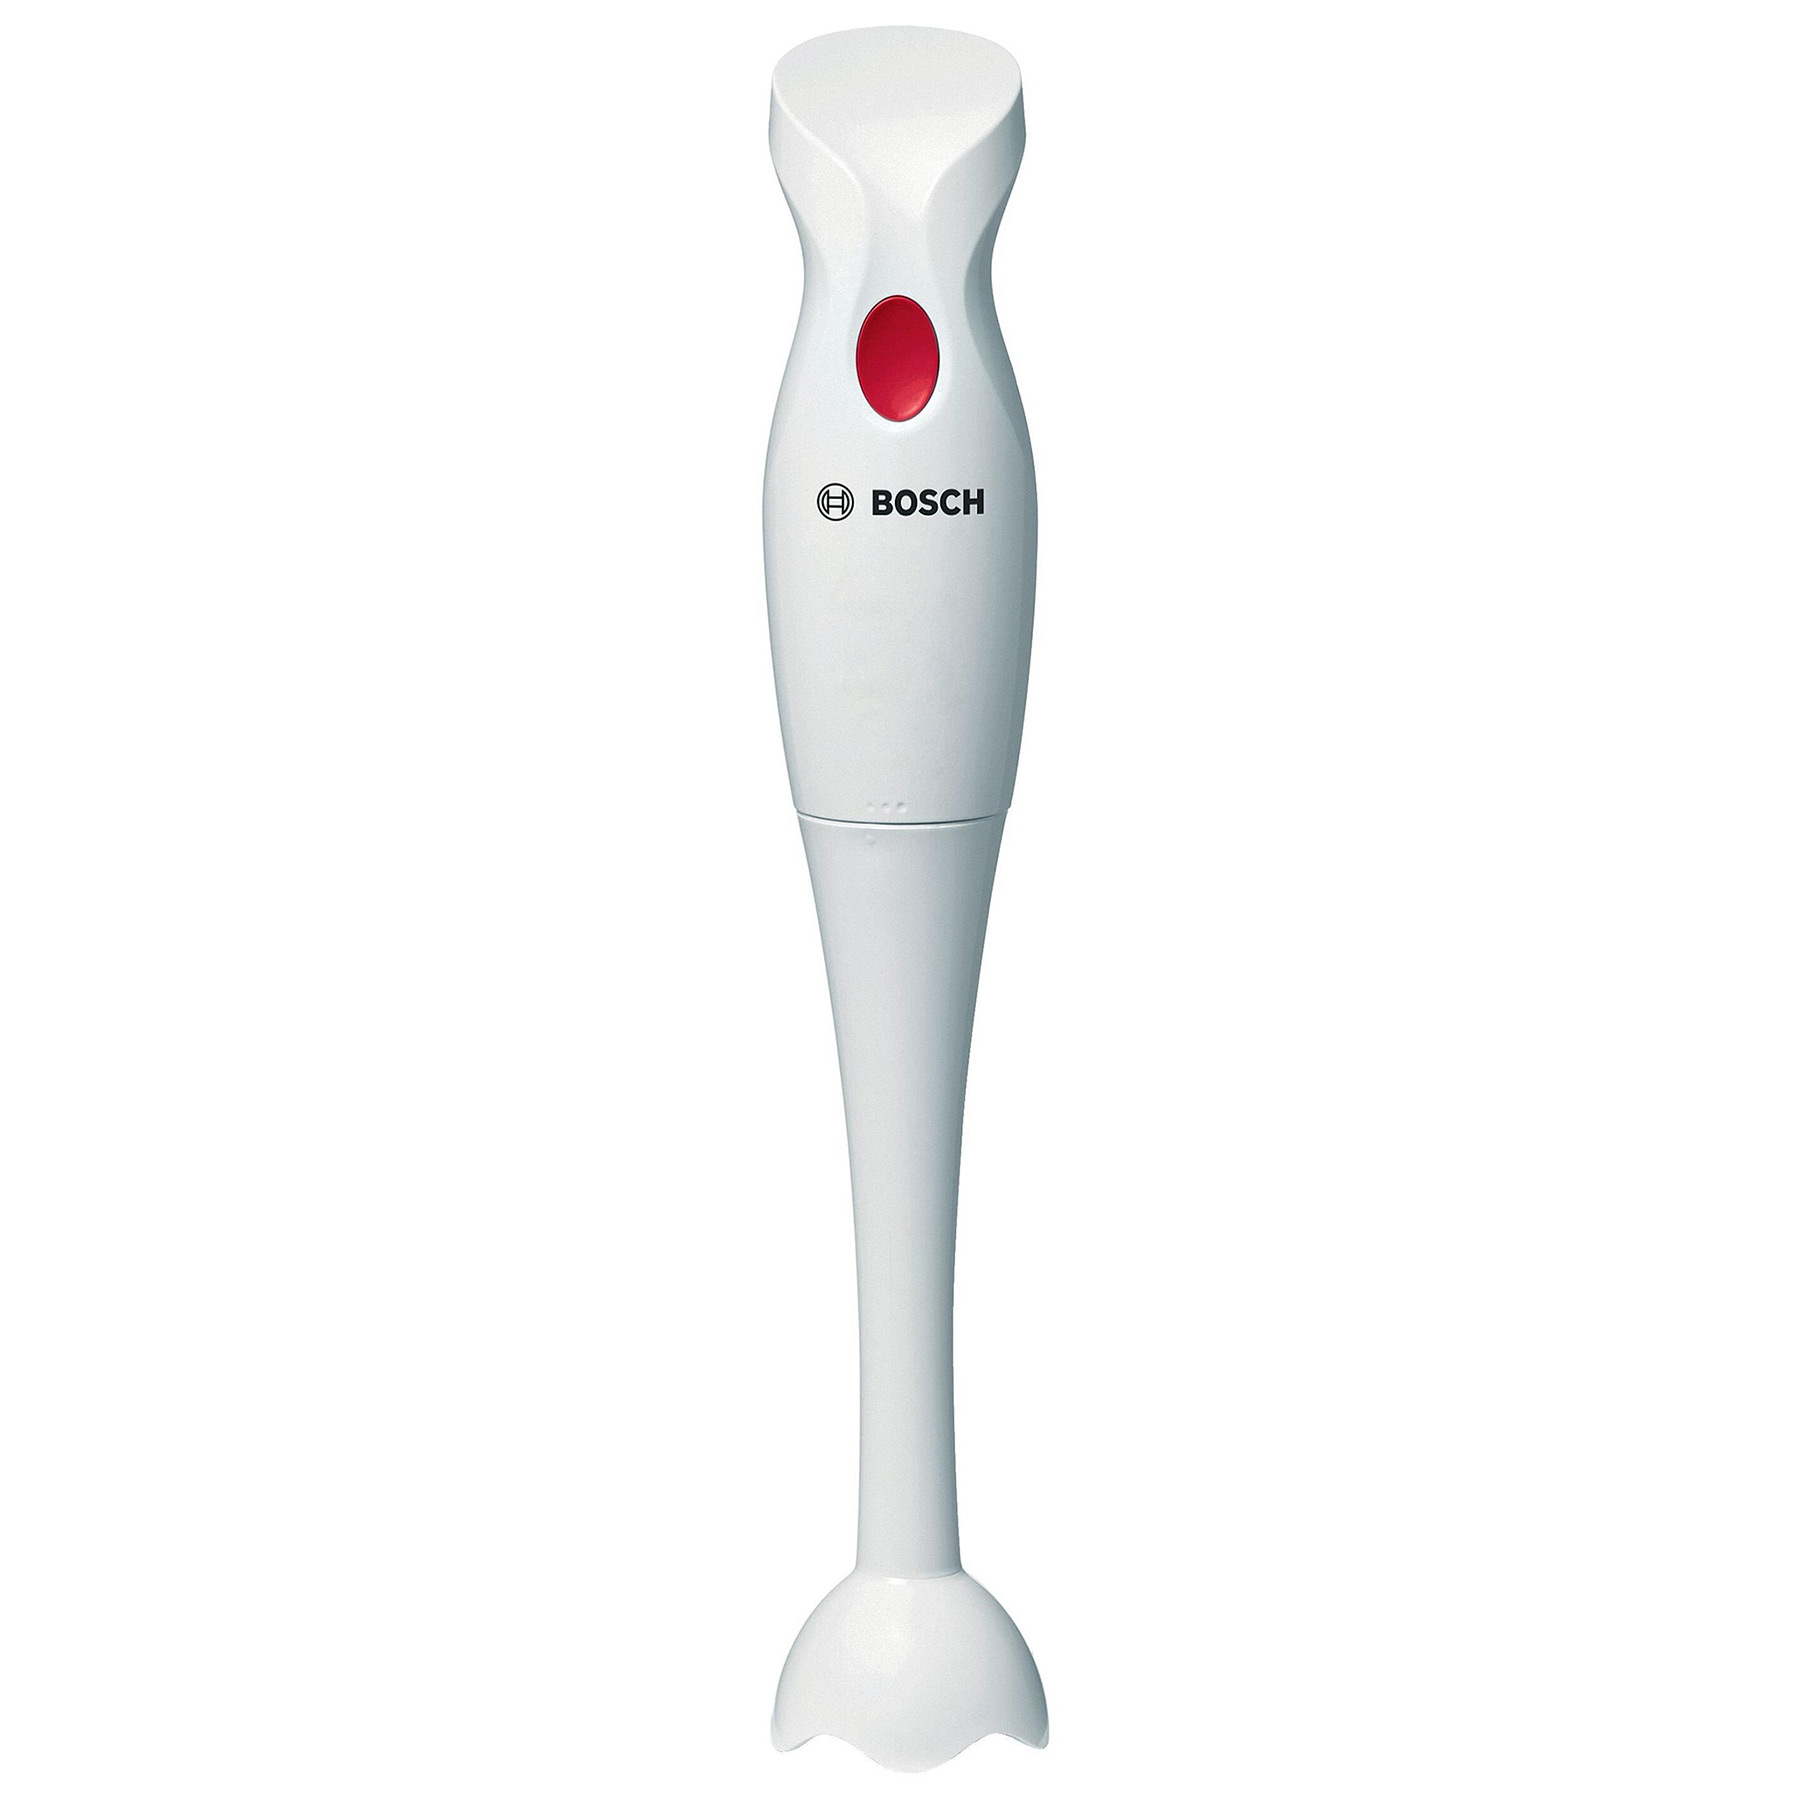 Image of Bosch MSMP1000GB Hand Blender in White Red 350W